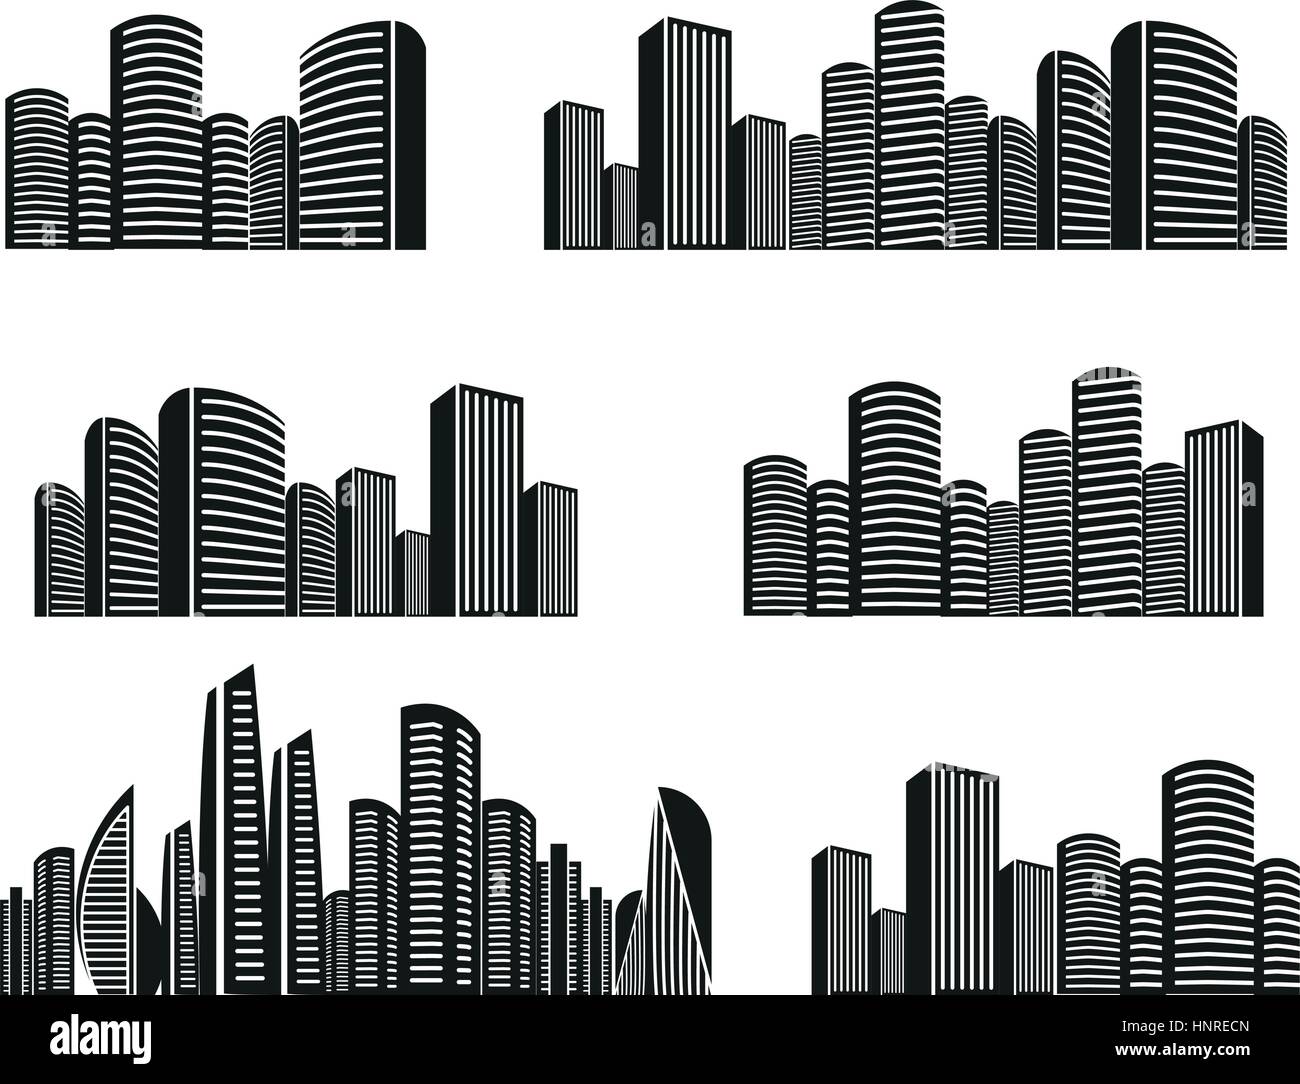 Isolated black and white color skyscrapers in lineart style icons collection, elements of urban architectural buildings vector illustrations set. Stock Vector